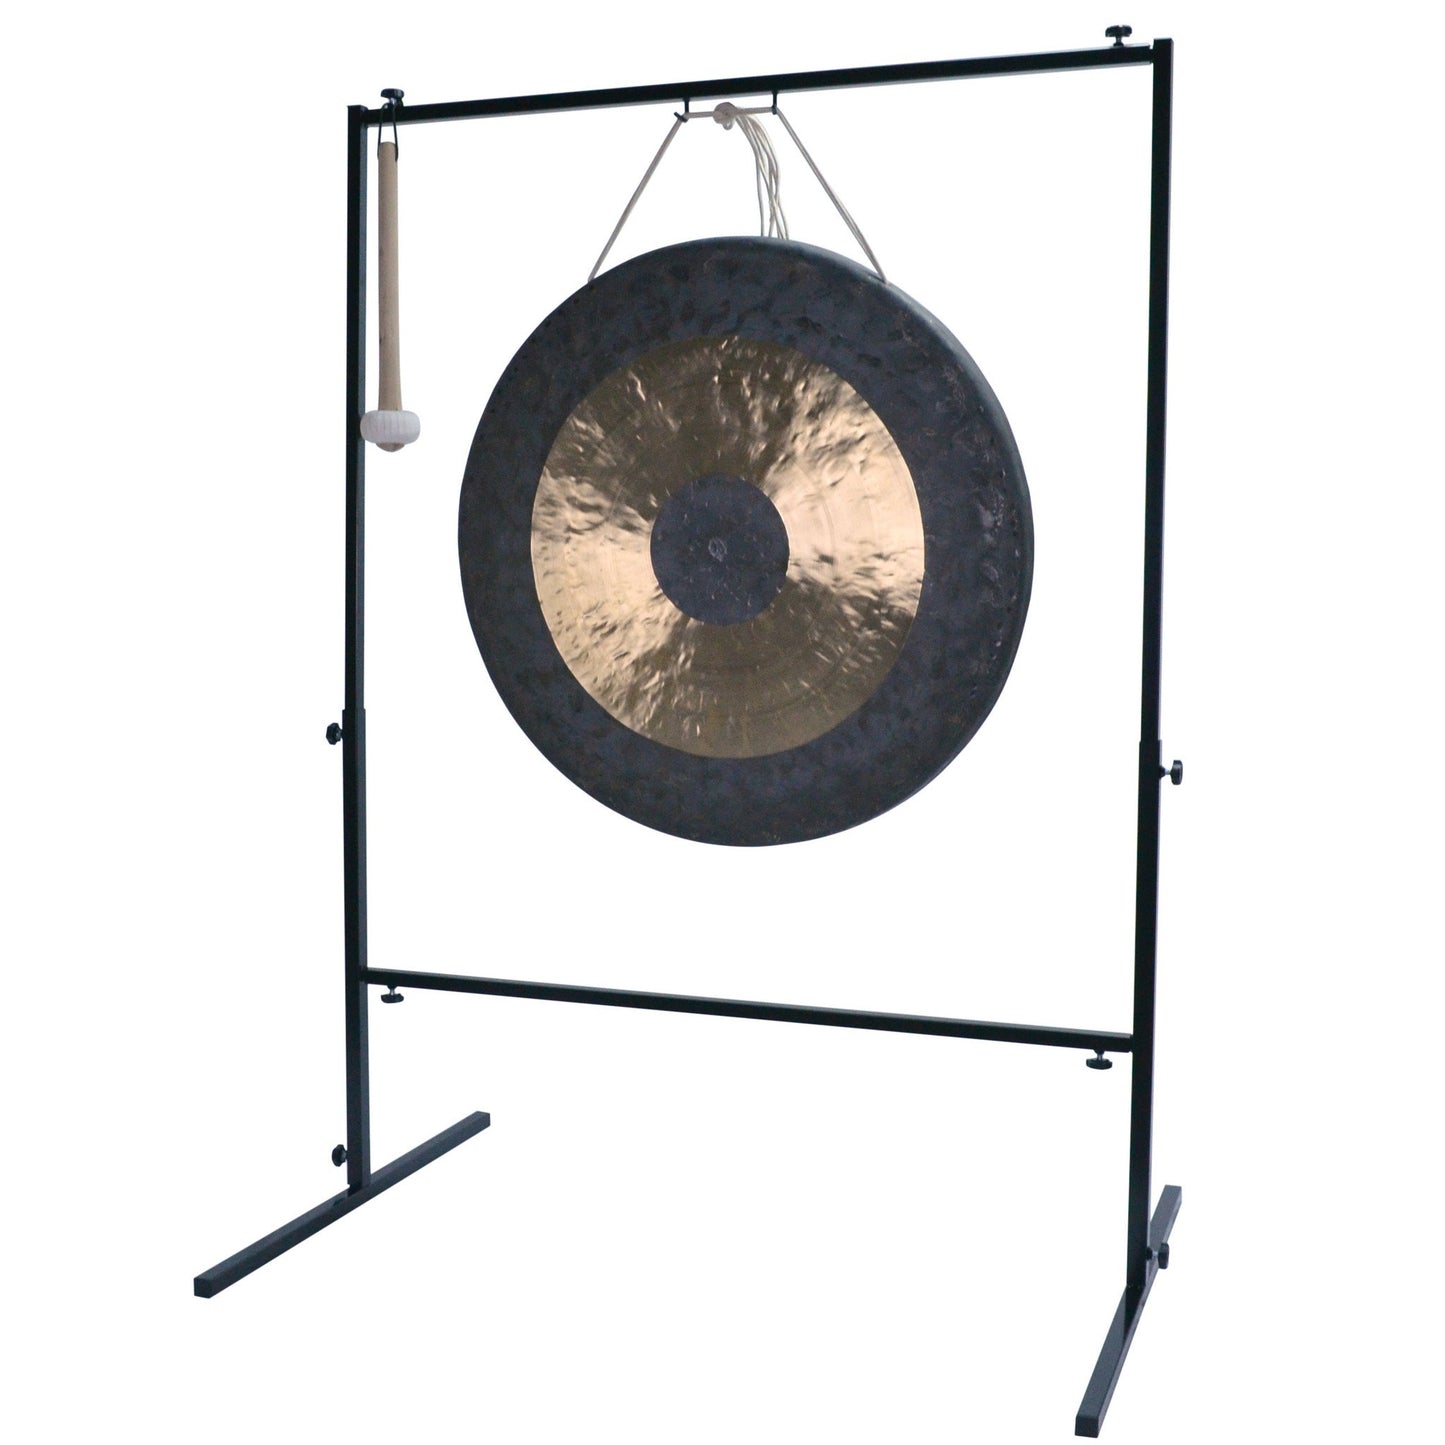 32" Chau Gong on Wuhan Gong Stand with Mallet